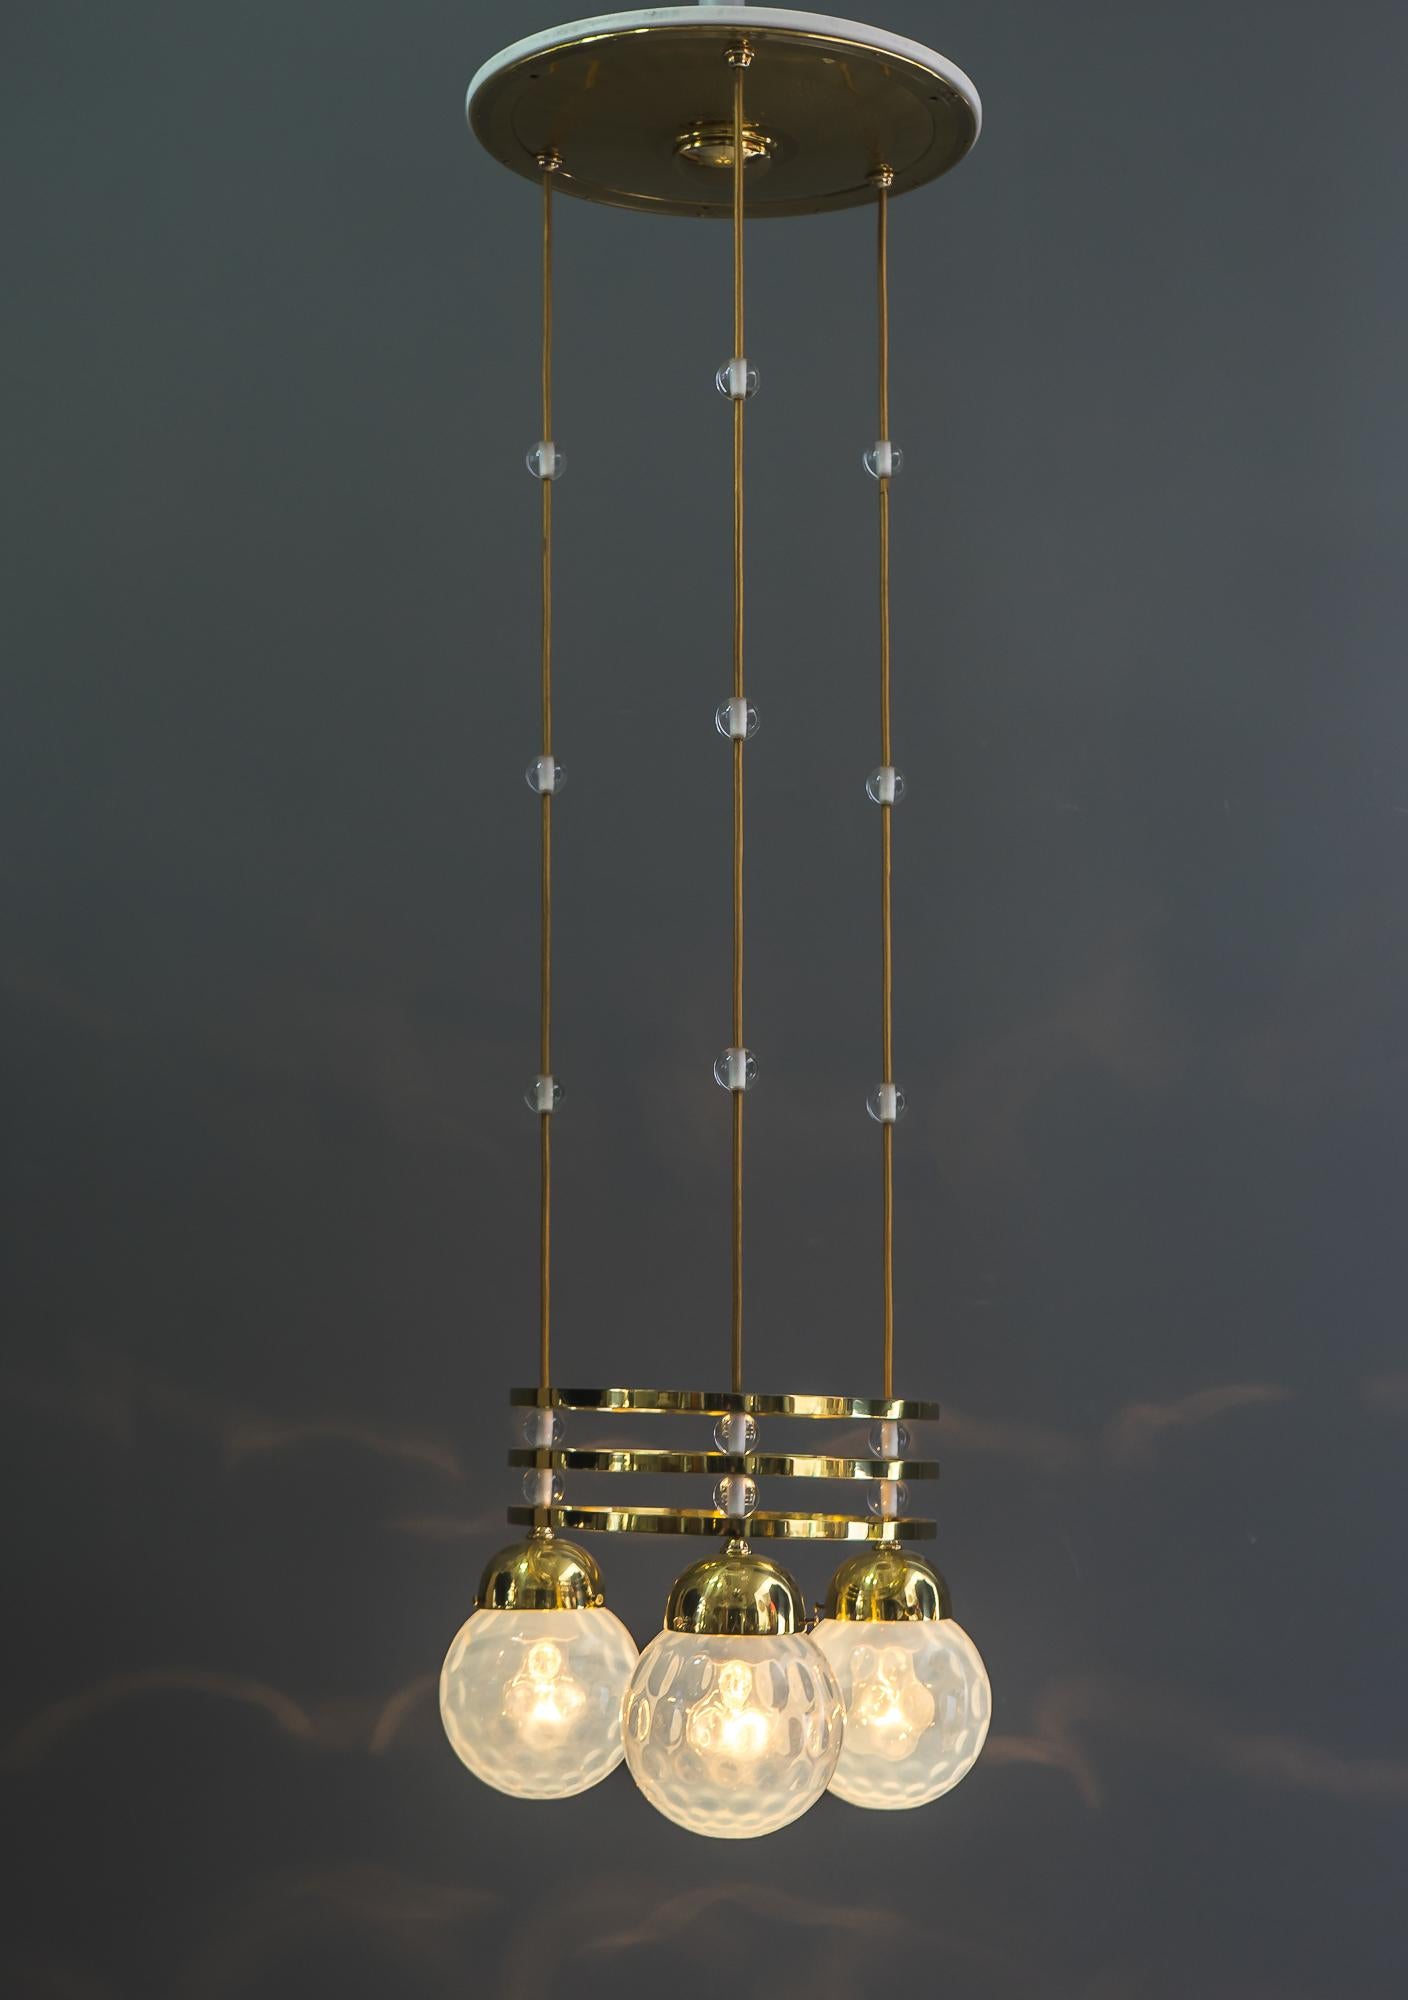 Jugendstil chandelier Vienna around 1903 with original loetz witwe glass shades
Executed by Bakalowits and Söhne
Polished and stove ennameled brass parts
New wired
Solid glass balls on wire 
We can adjust the height to the height of the room.